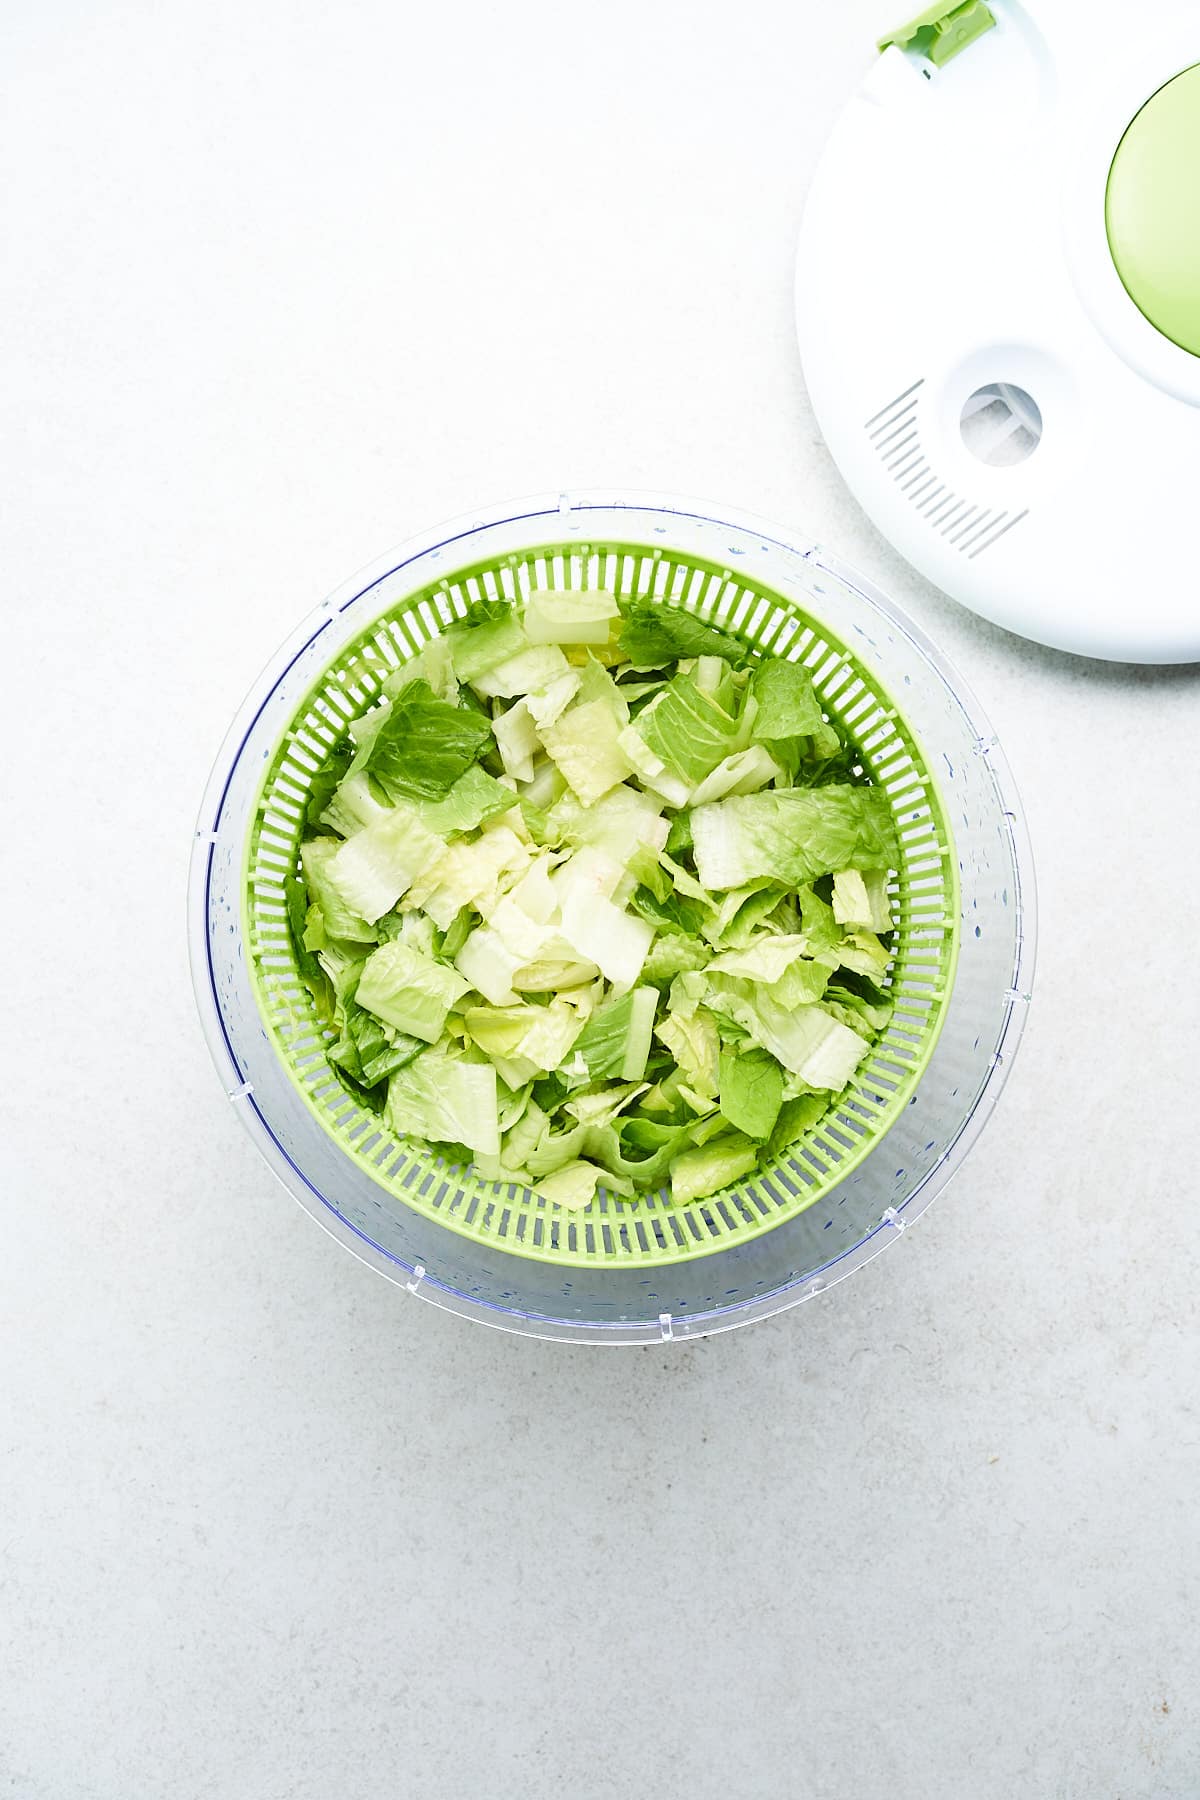 Washing lettuce in a salad spinner.